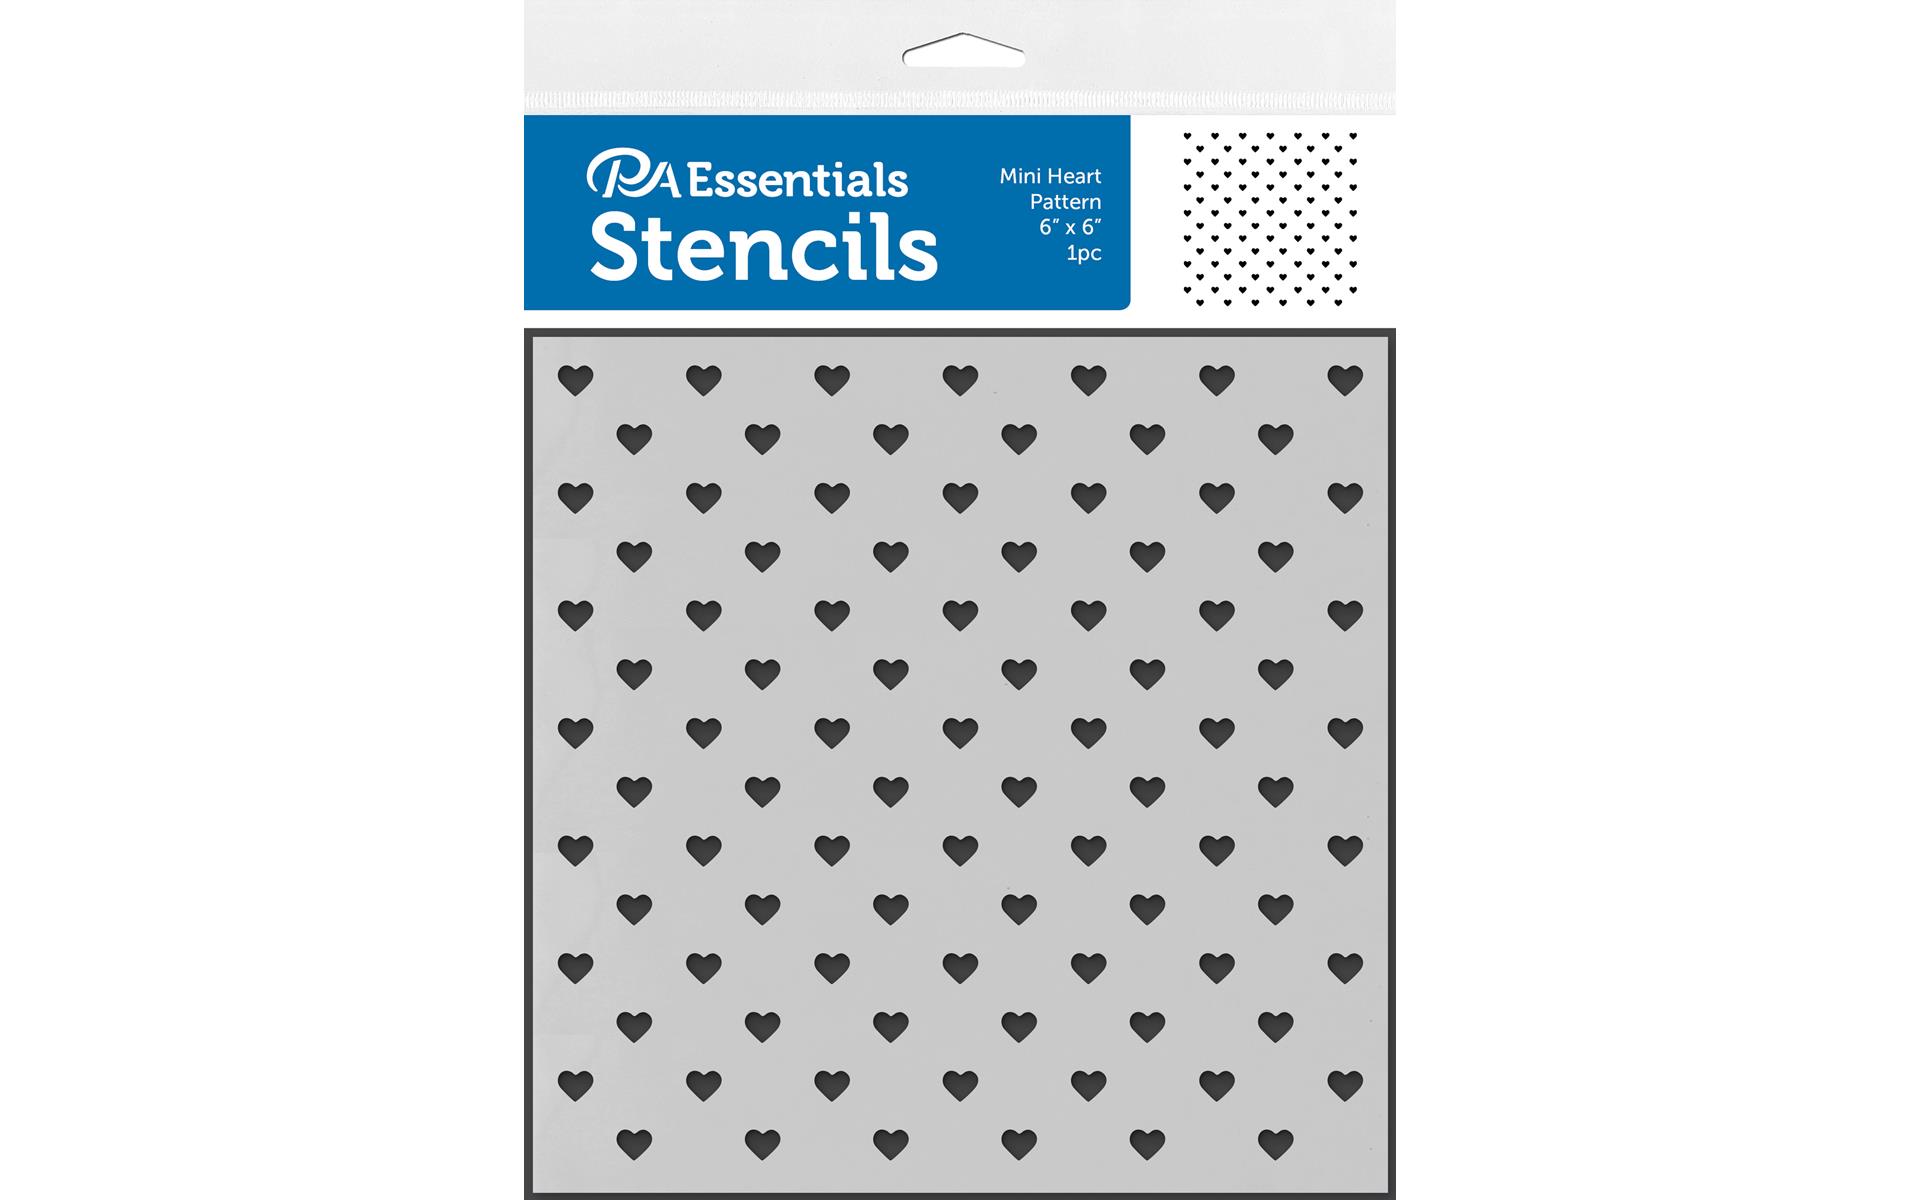 PA Essentials Stencil Mini Heart Pattern for Painting on Wood